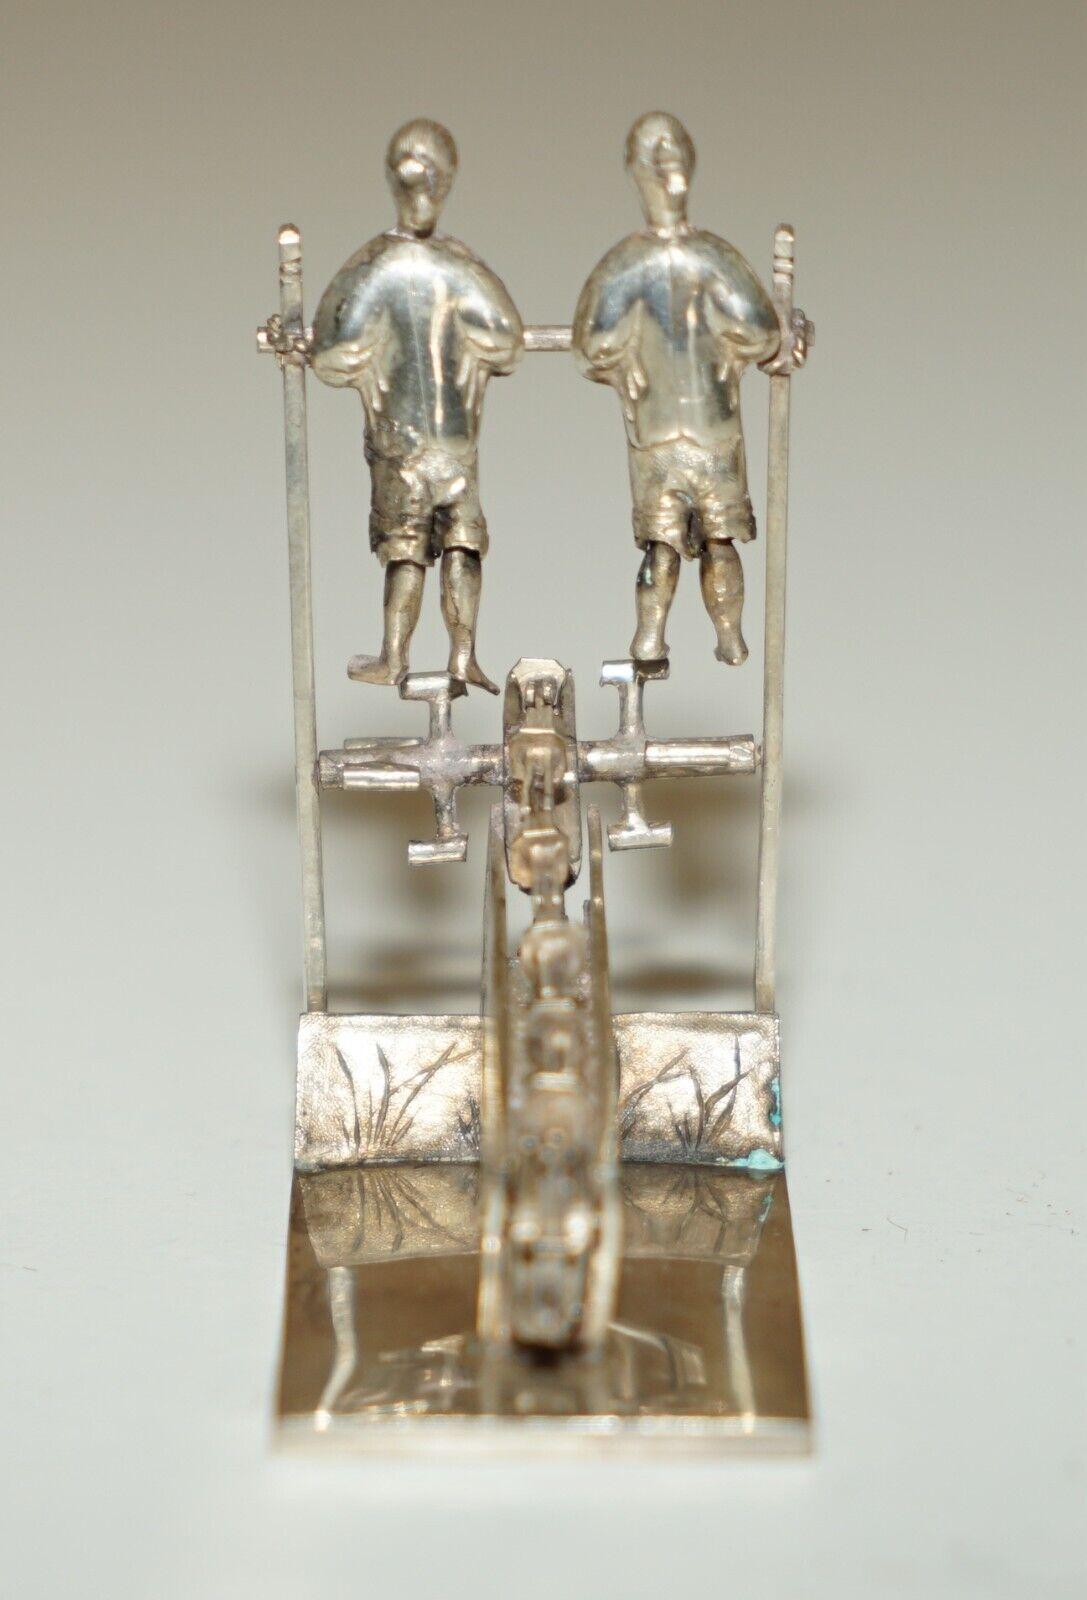 Late 19th Century ANTIQUE CIRCA 1890 CHINESE STERLiNG SILVER STATUE OF MEN PEDDLING WITH A CHAIN For Sale